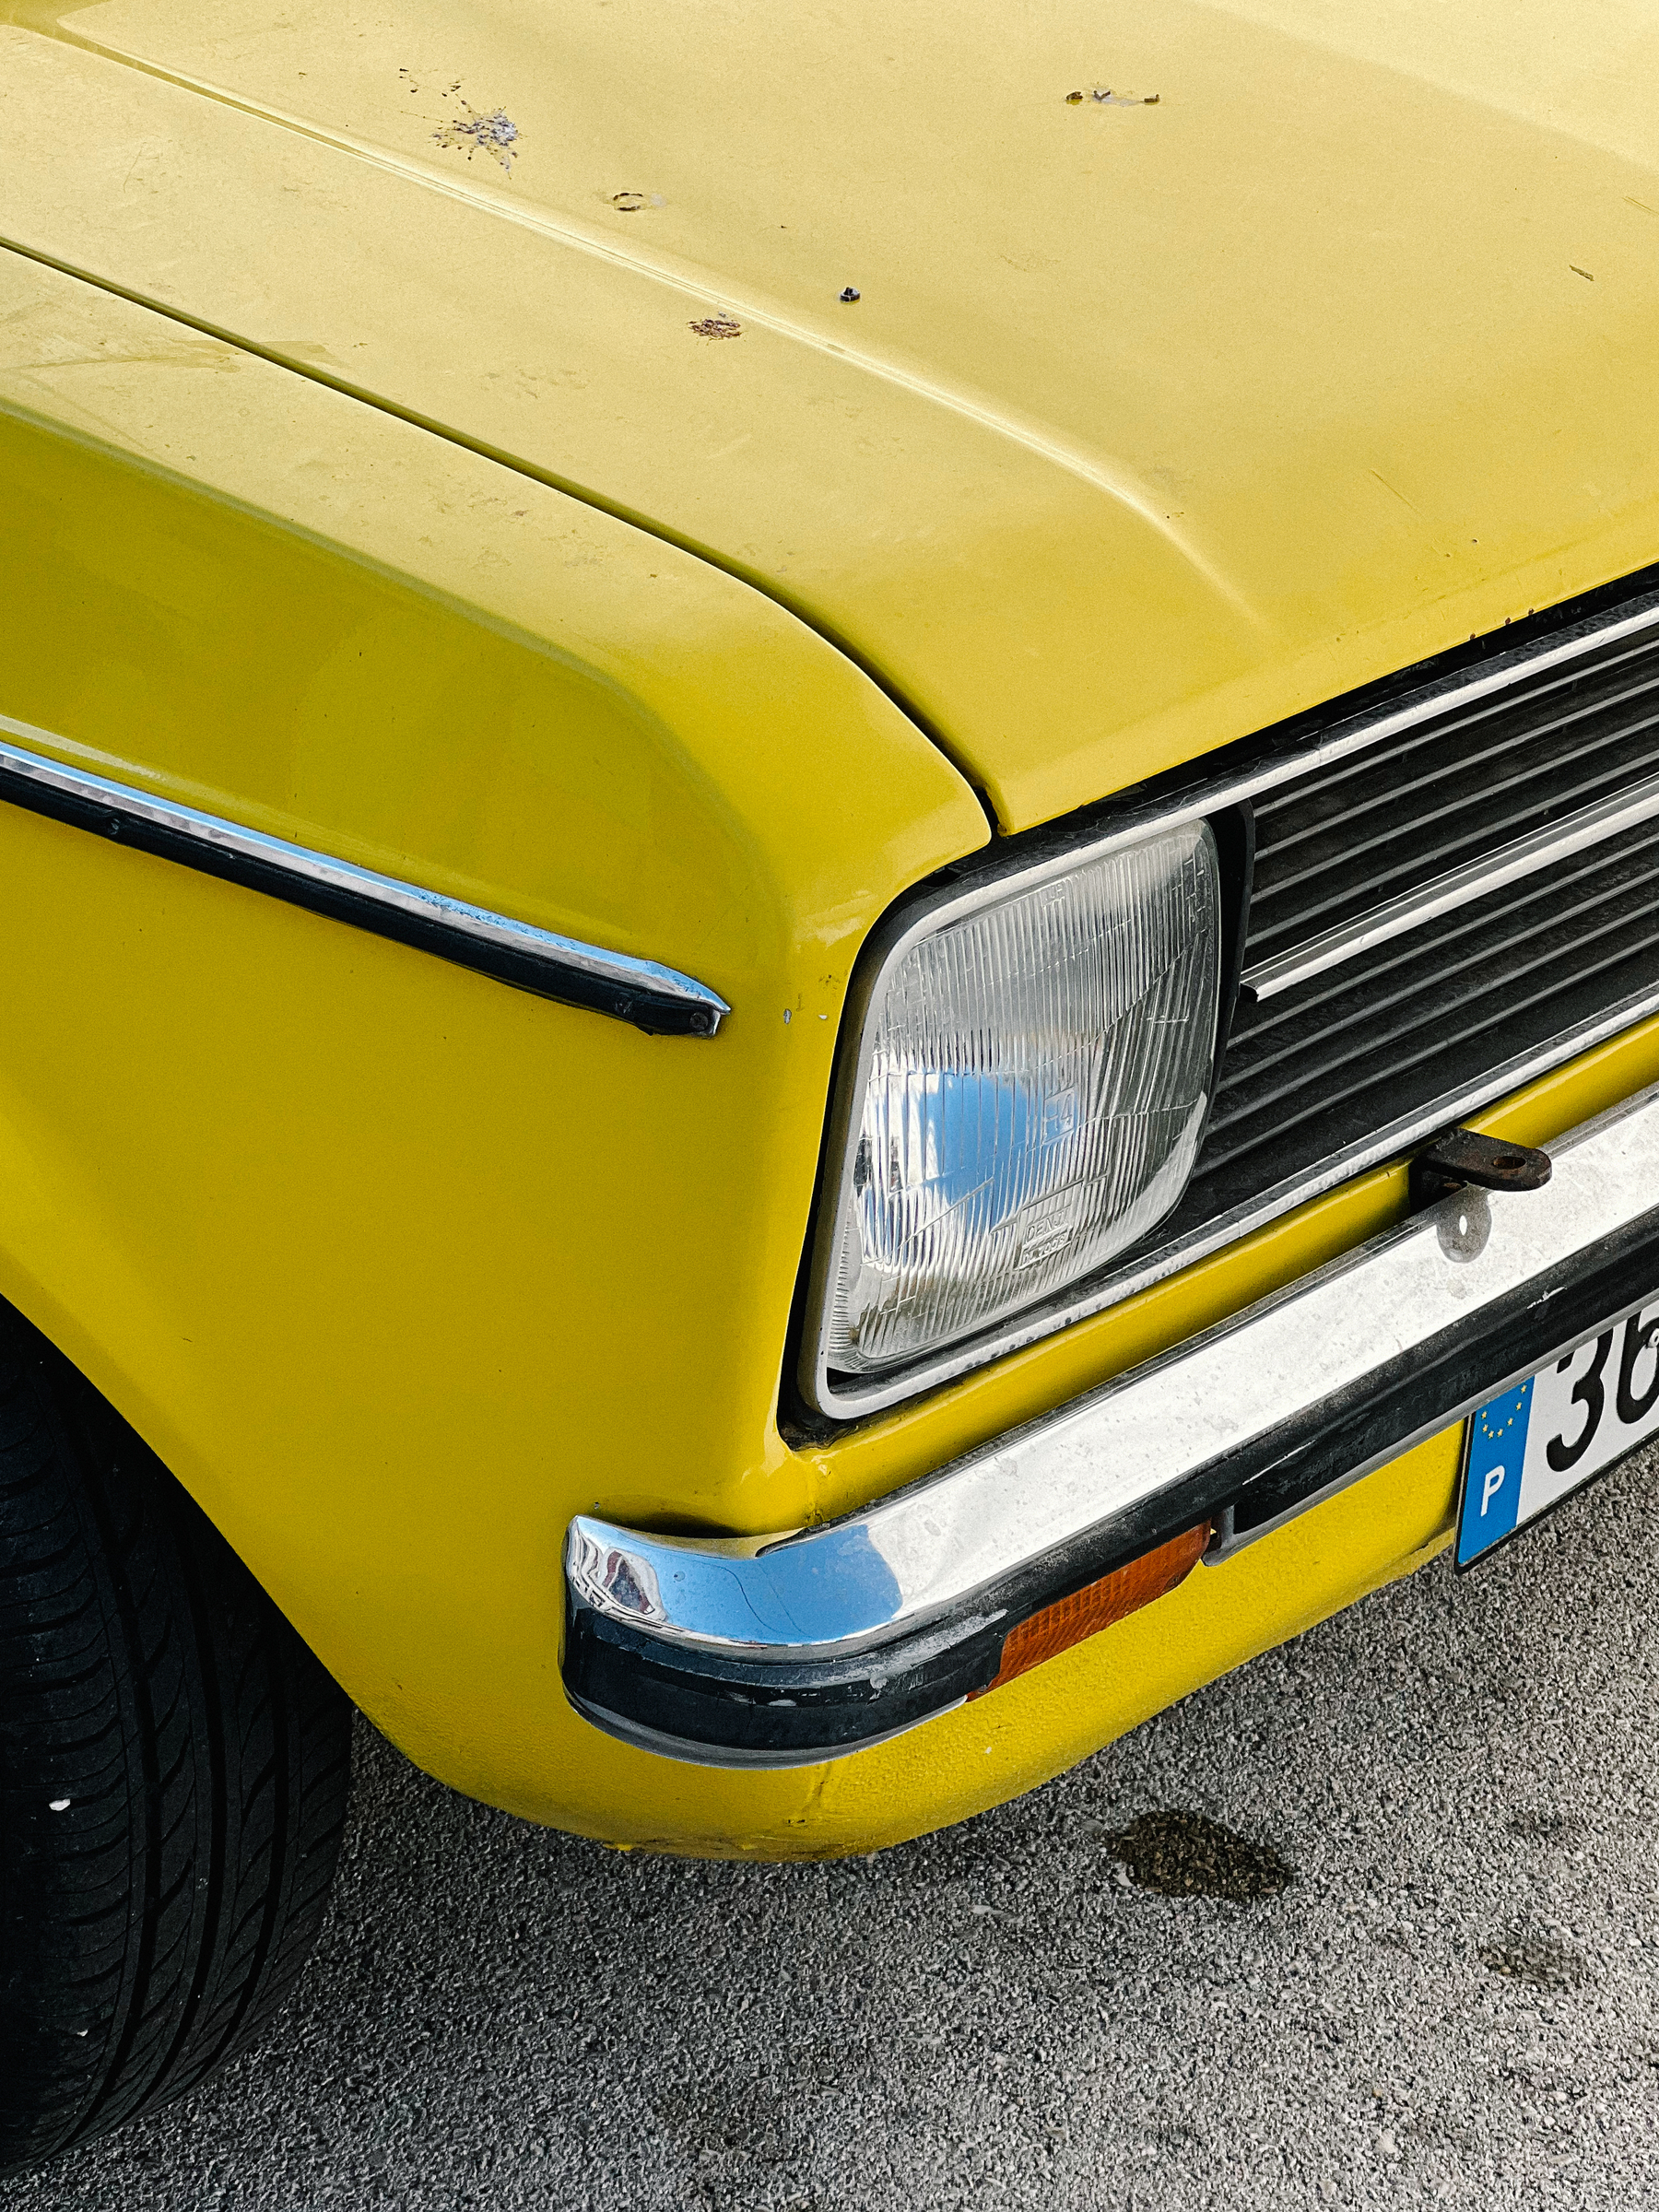 Detail of a yellow vintage Ford.